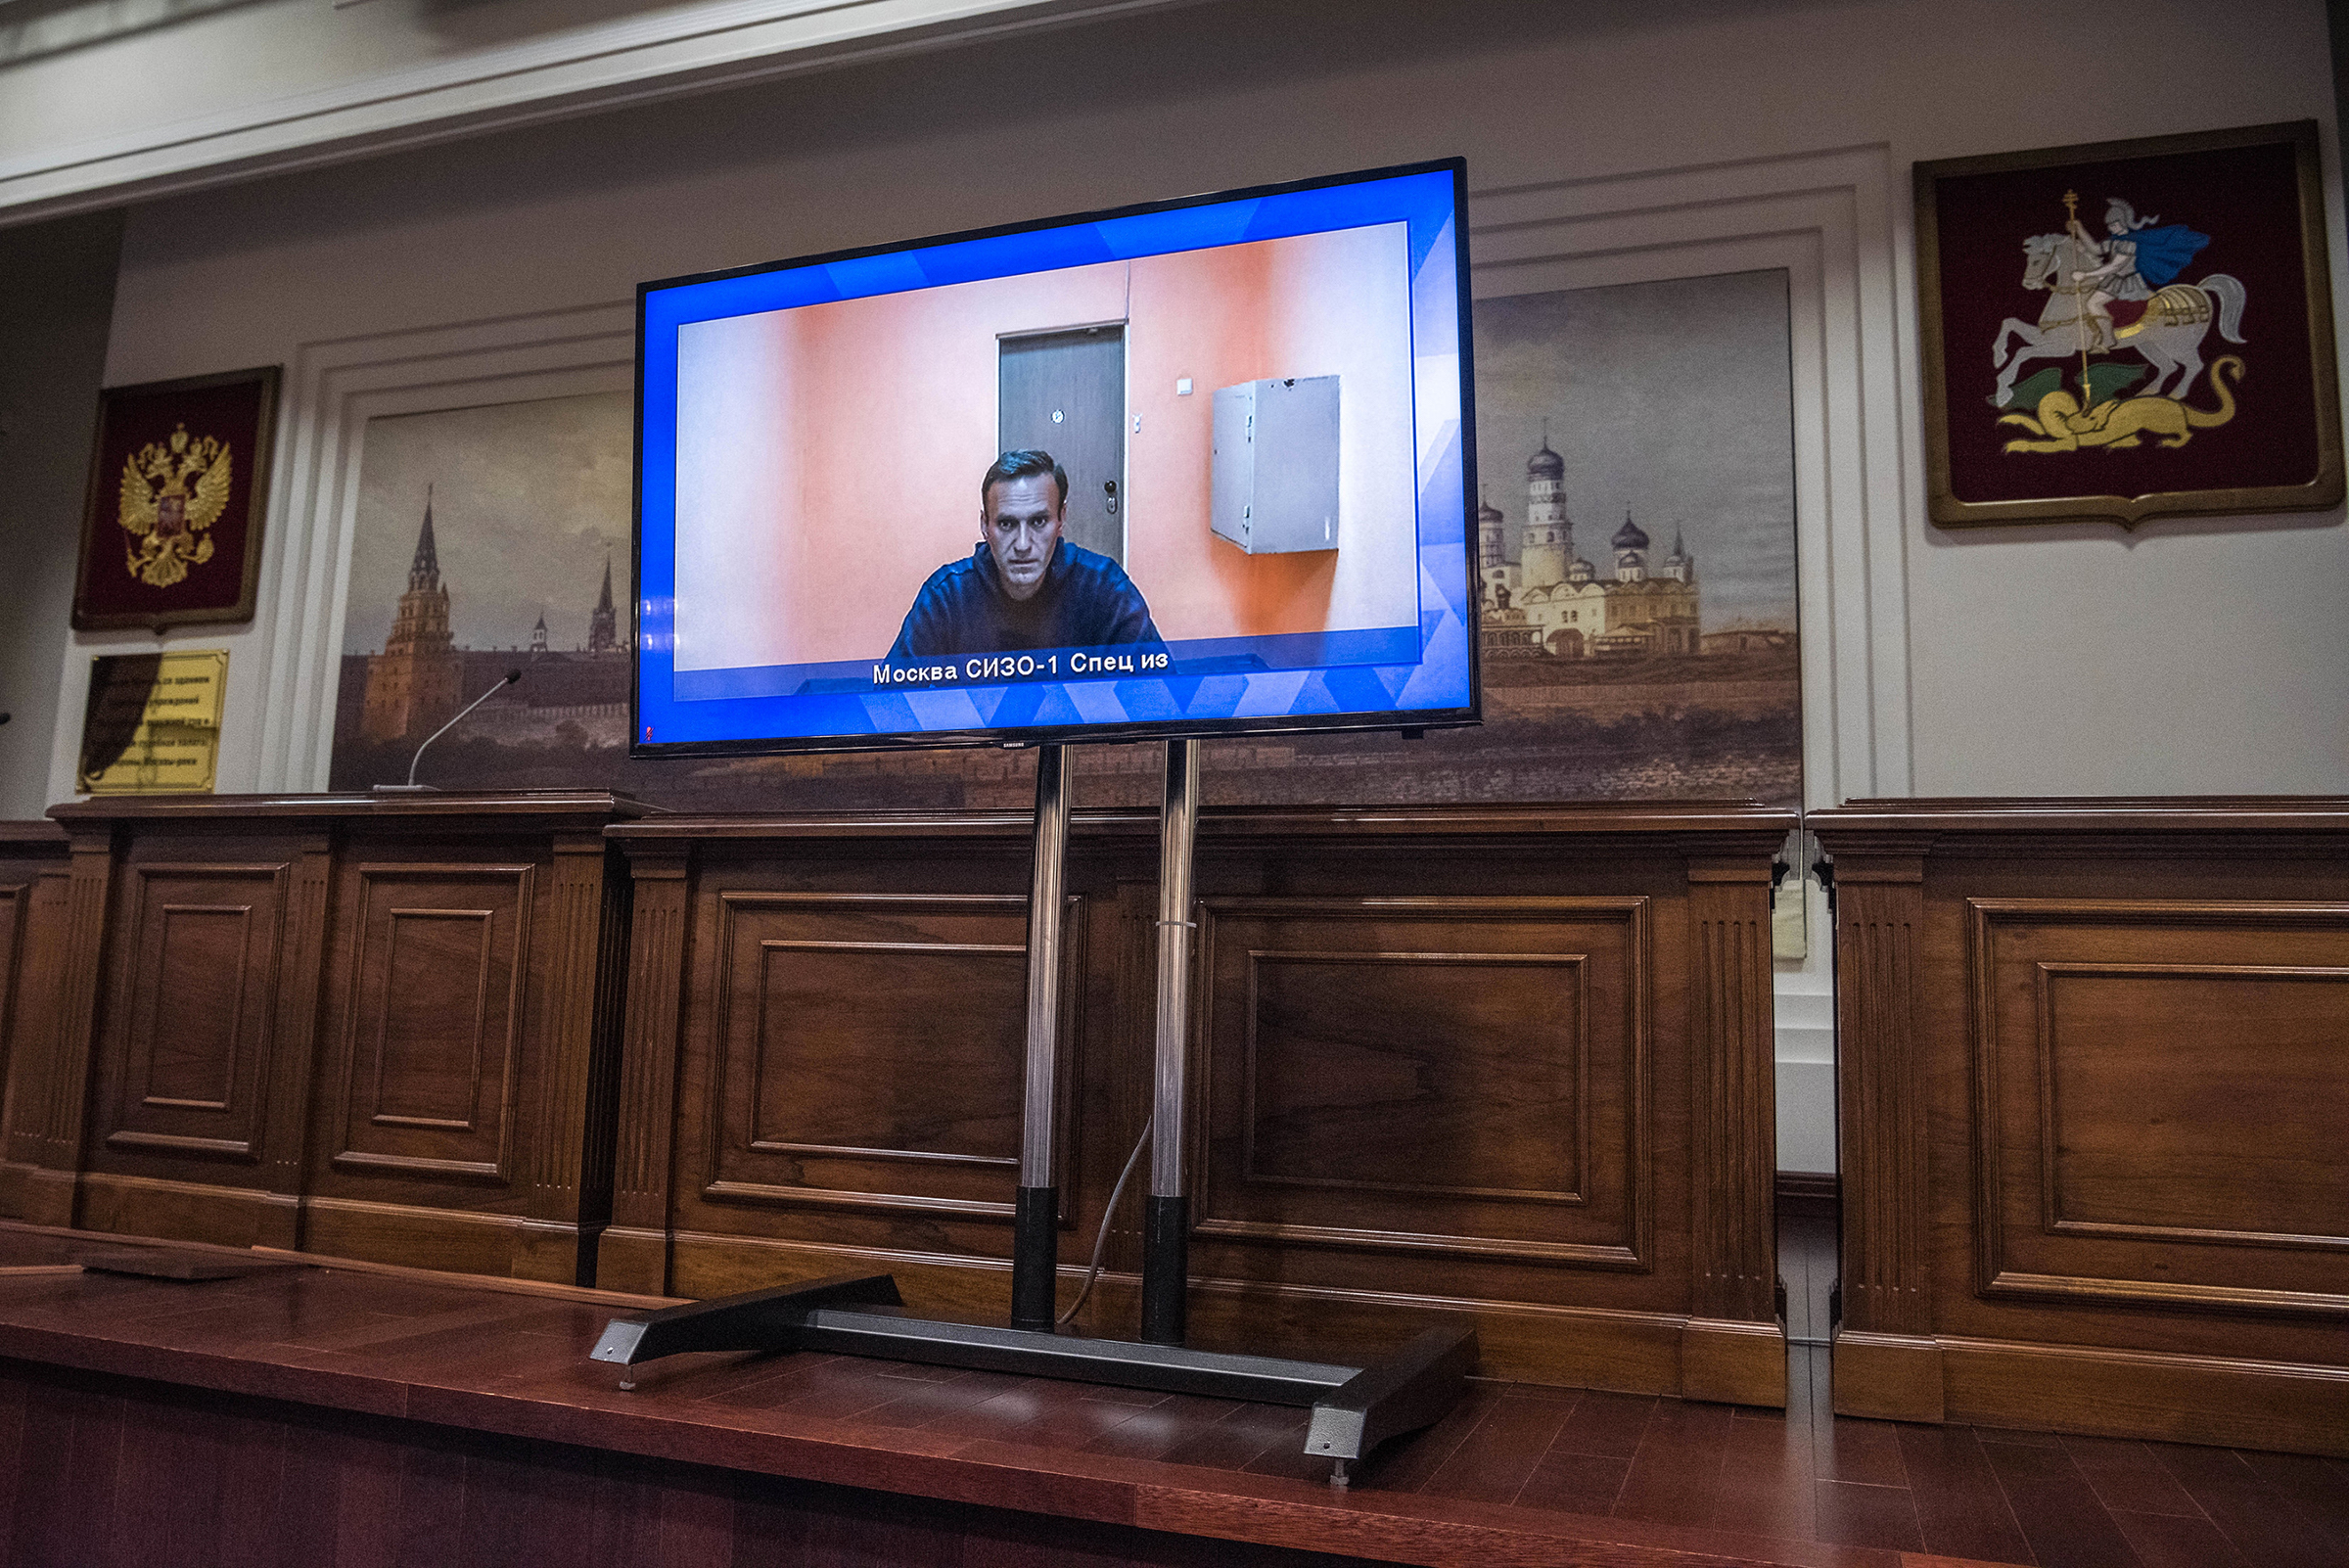 Russian opposition leader Alexei Navalny appears via video conference for a Moscow court hearing on Jan. 28, during which he was ordered to remain imprisoned after his arrival back in Russia from Germany, where he had been recuperating following a poisoning that nearly killed him. Navalny—who in February was sentenced to two years and eight months in prison—has become a rallying figure for many Russians with grievances about Vladimir Putin’s 20-year reign. (Sergey Ponomarev—The New York Times/Redux)